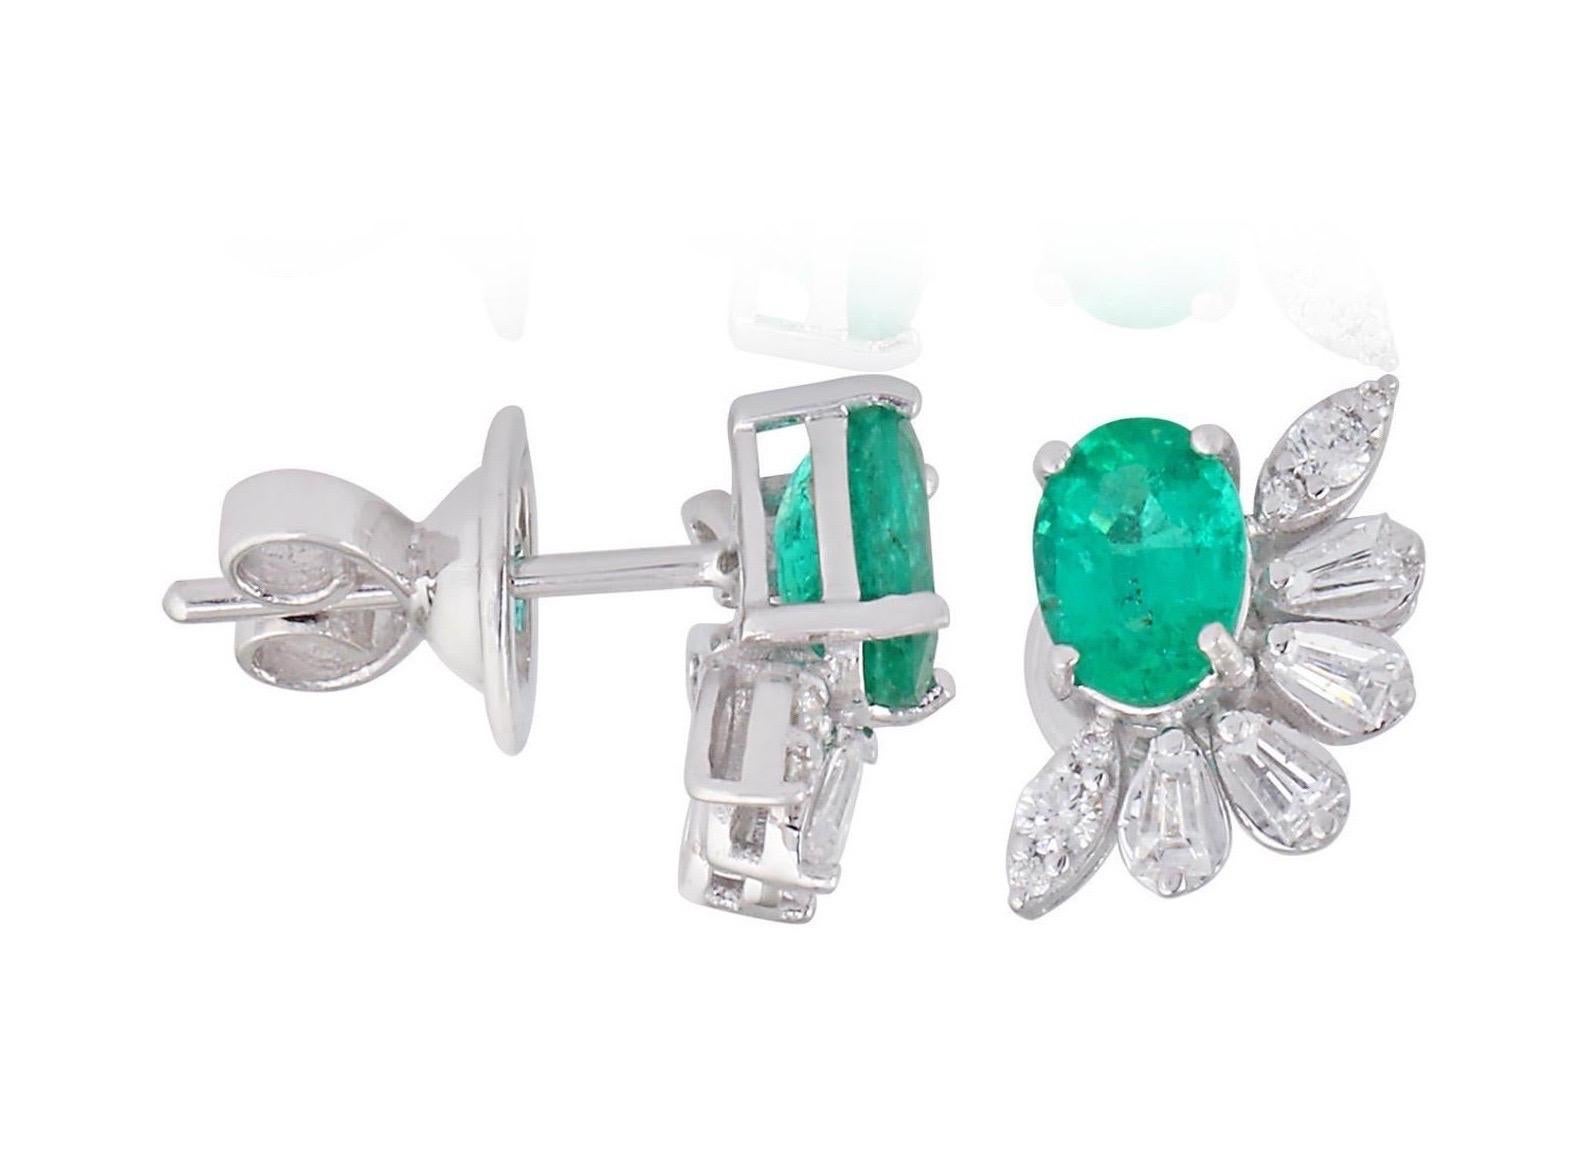 Cast in 18 karat gold, these stunning stud earrings are hand set with 1.85 carats emerald and .55 carats of glimmering diamonds. 

FOLLOW MEGHNA JEWELS storefront to view the latest collection & exclusive pieces. Meghna Jewels is proudly rated as a